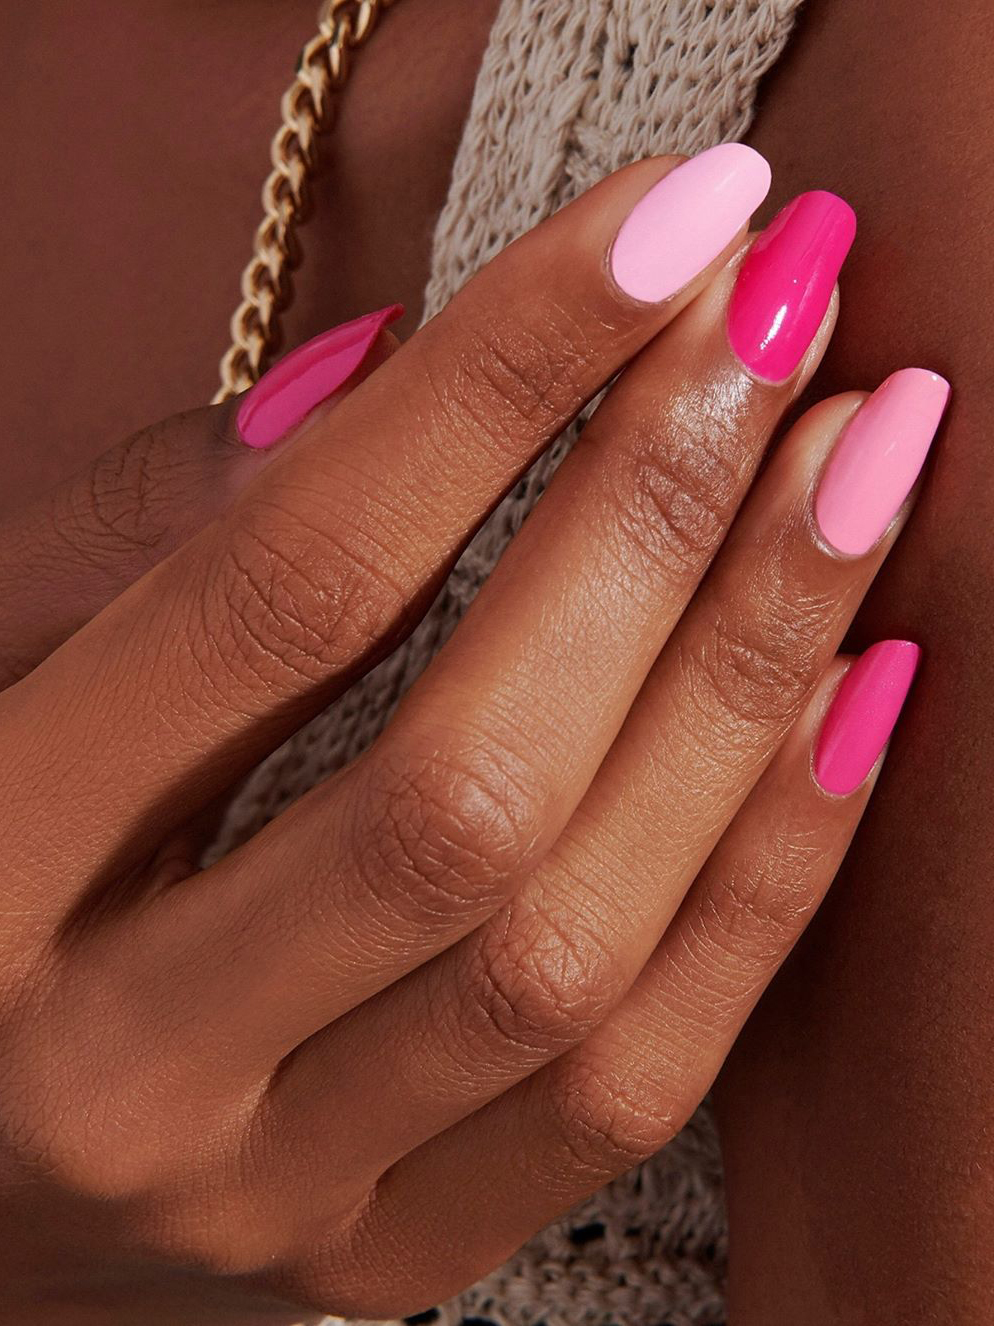 The 18 Best Sally Hansen Nail Polishes That Are Timeless | Who What Wear